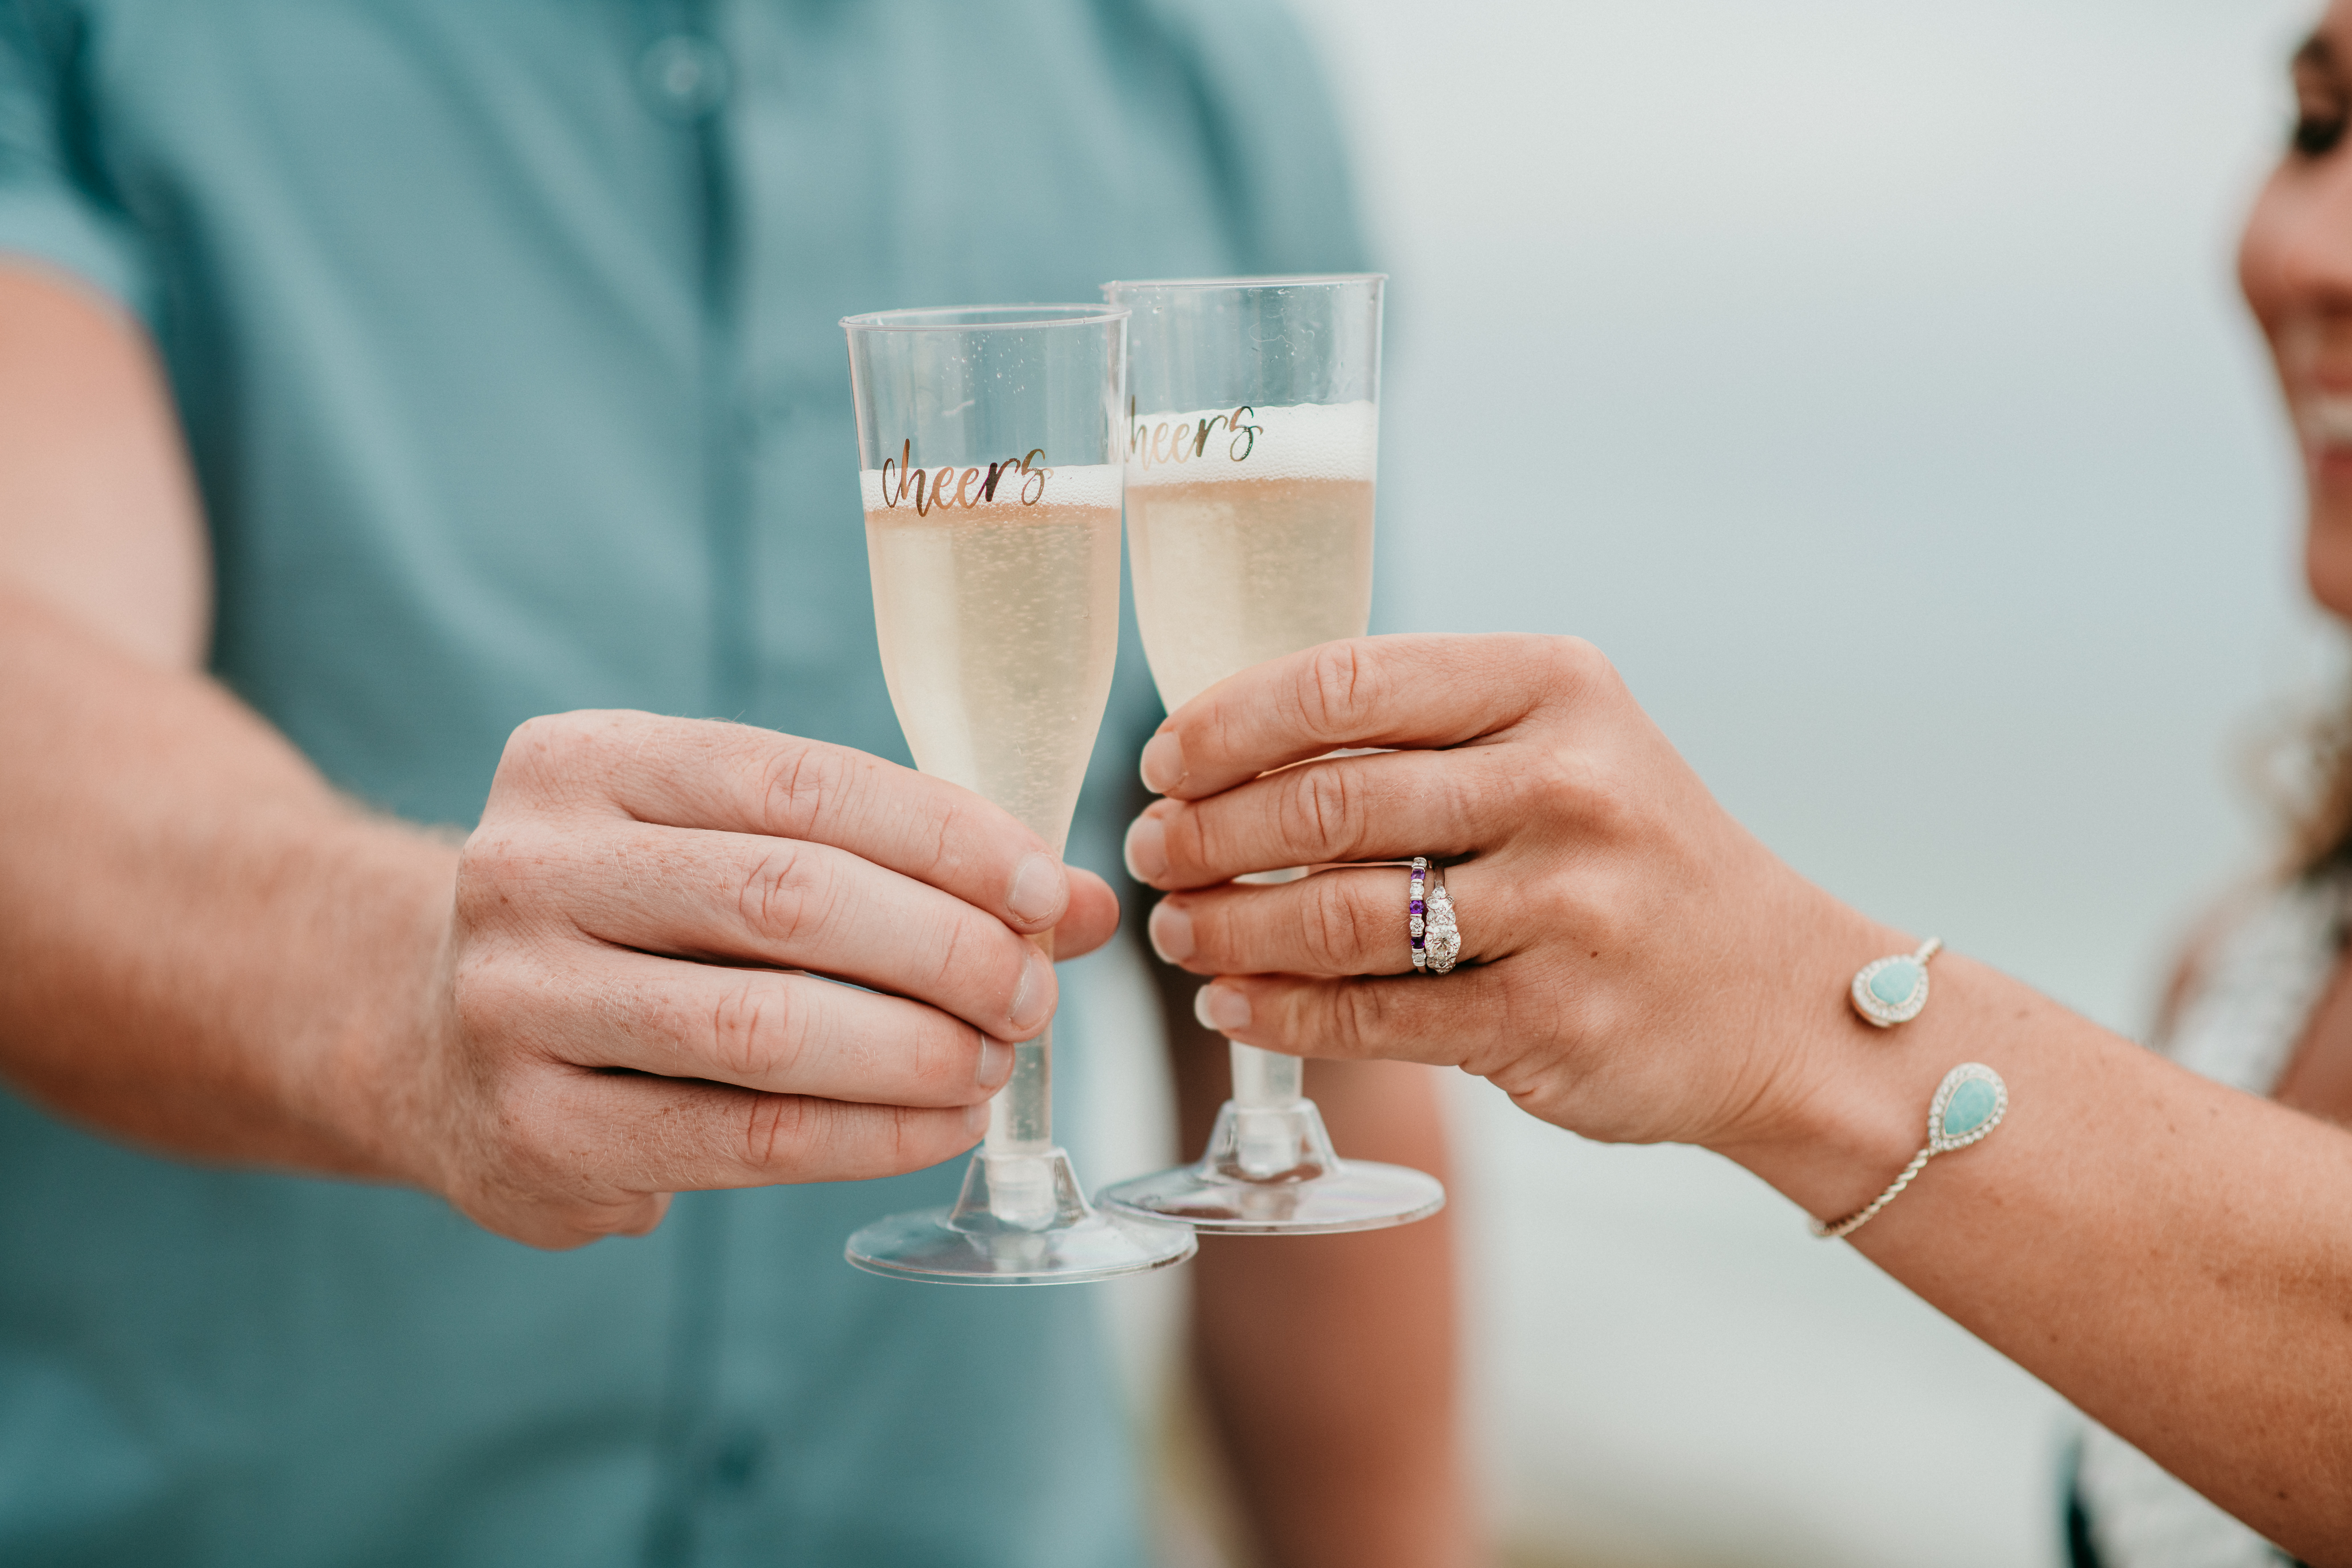 Immediately following his San Diego Proposal, the couple share a toast with Champagne in beach-friendly plastic "Cheers" Flutes